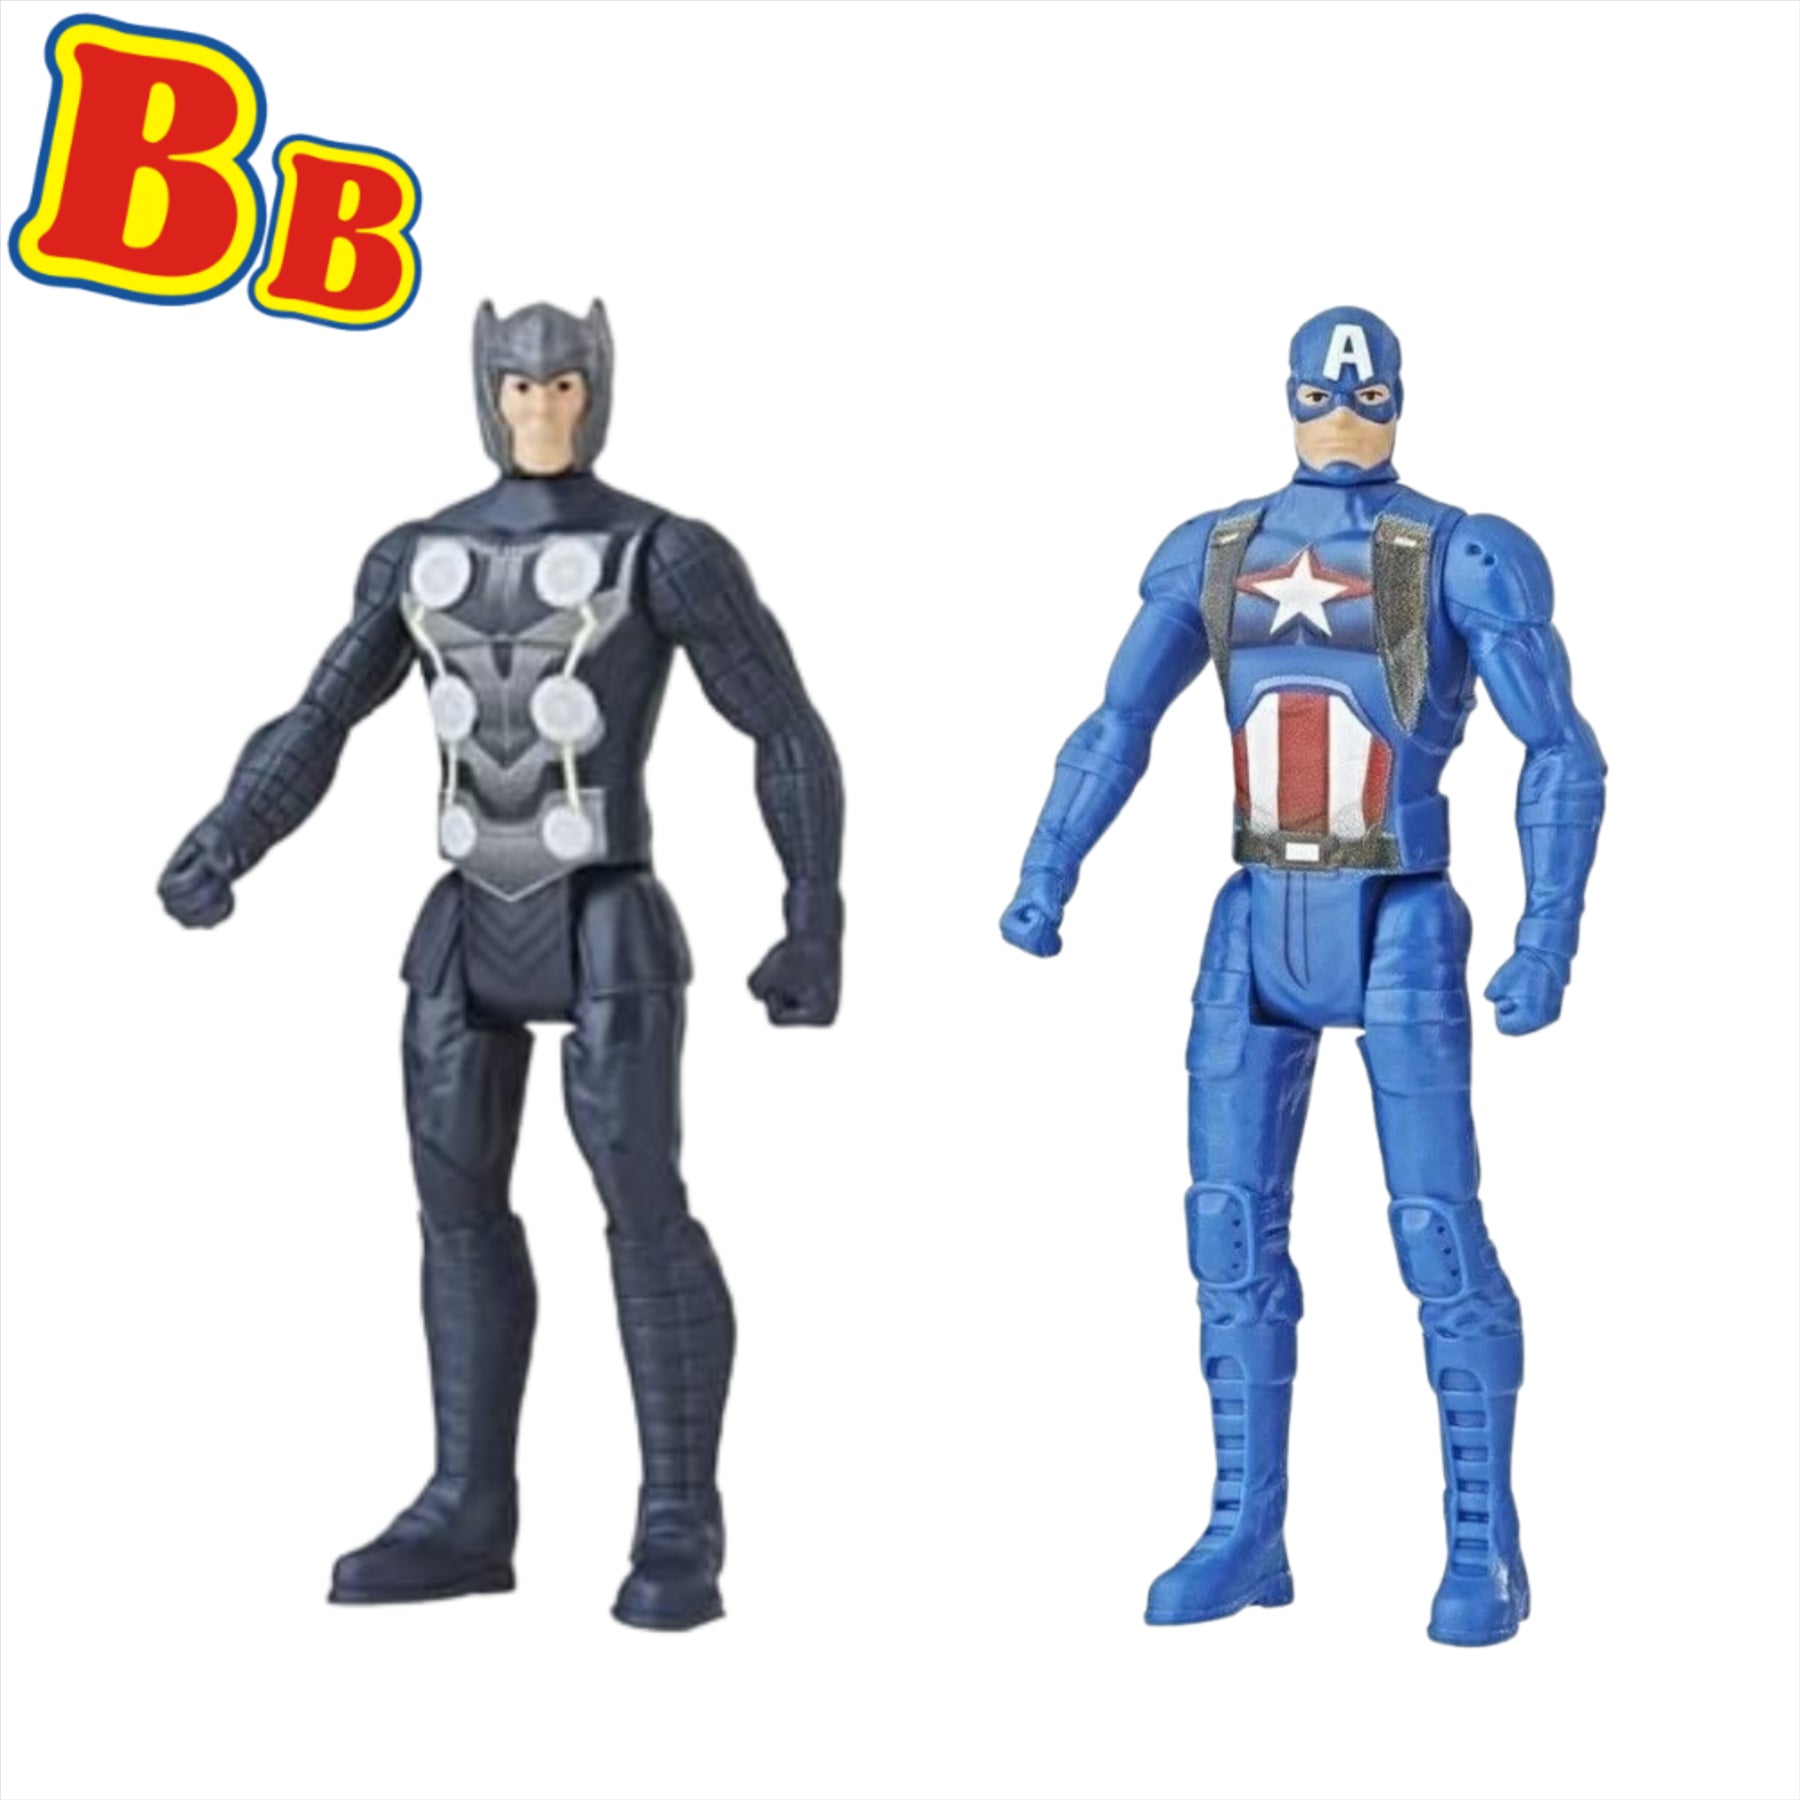 Marvel Avengers Articulated Action Figures - 3.75" 9.5cm Thor & Captain America Twin Pack - Toptoys2u